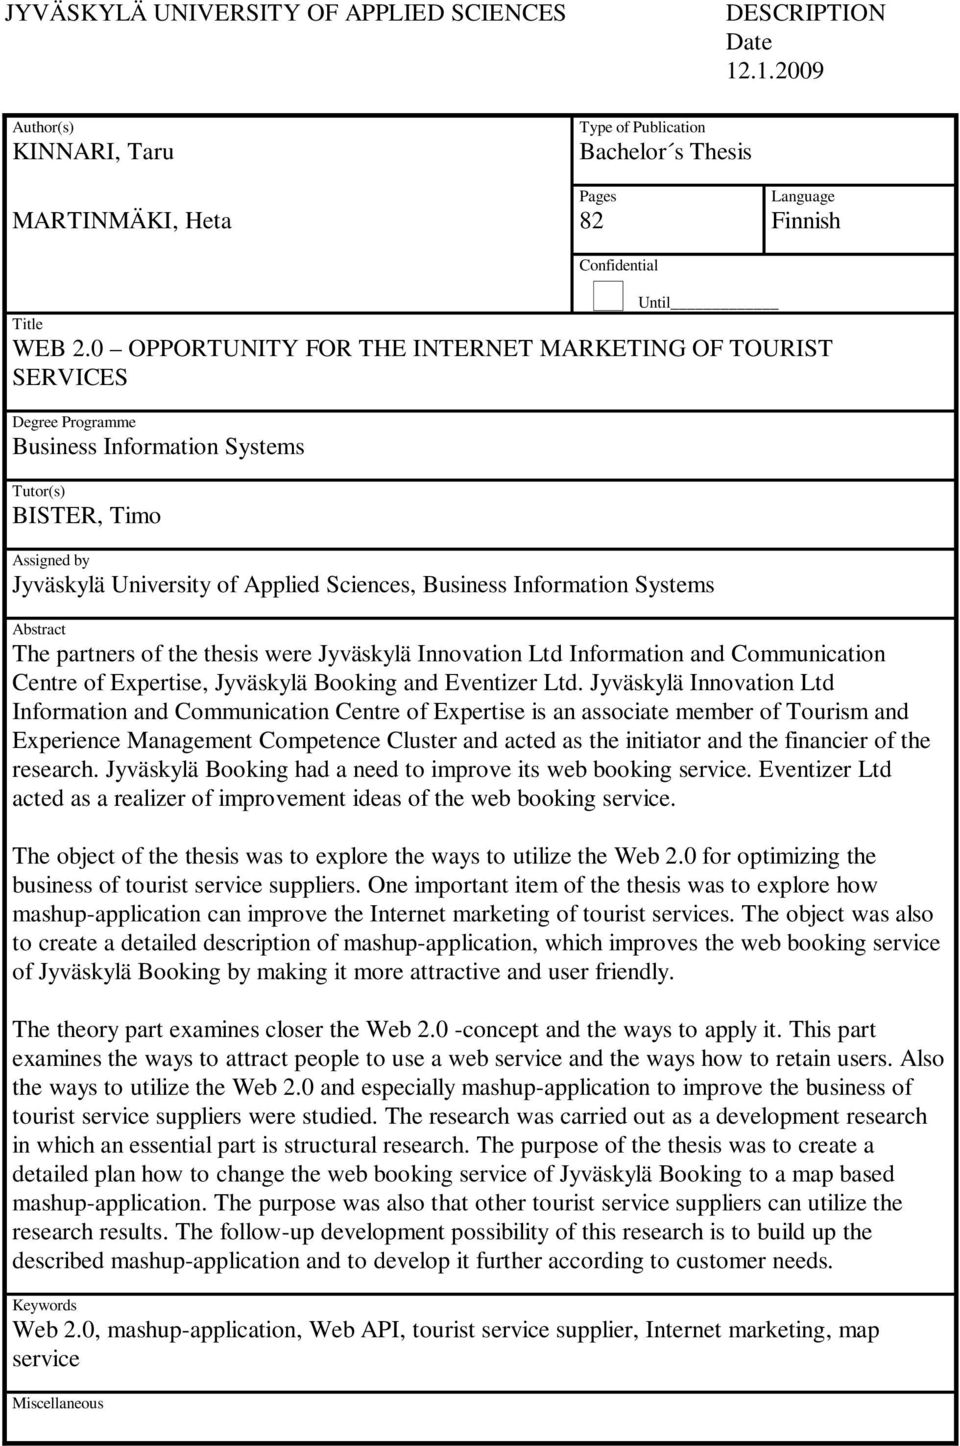 0 OPPORTUNITY FOR THE INTERNET MARKETING OF TOURIST SERVICES Degree Programme Business Information Systems Tutor(s) BISTER, Timo Assigned by Jyväskylä University of Applied Sciences, Business